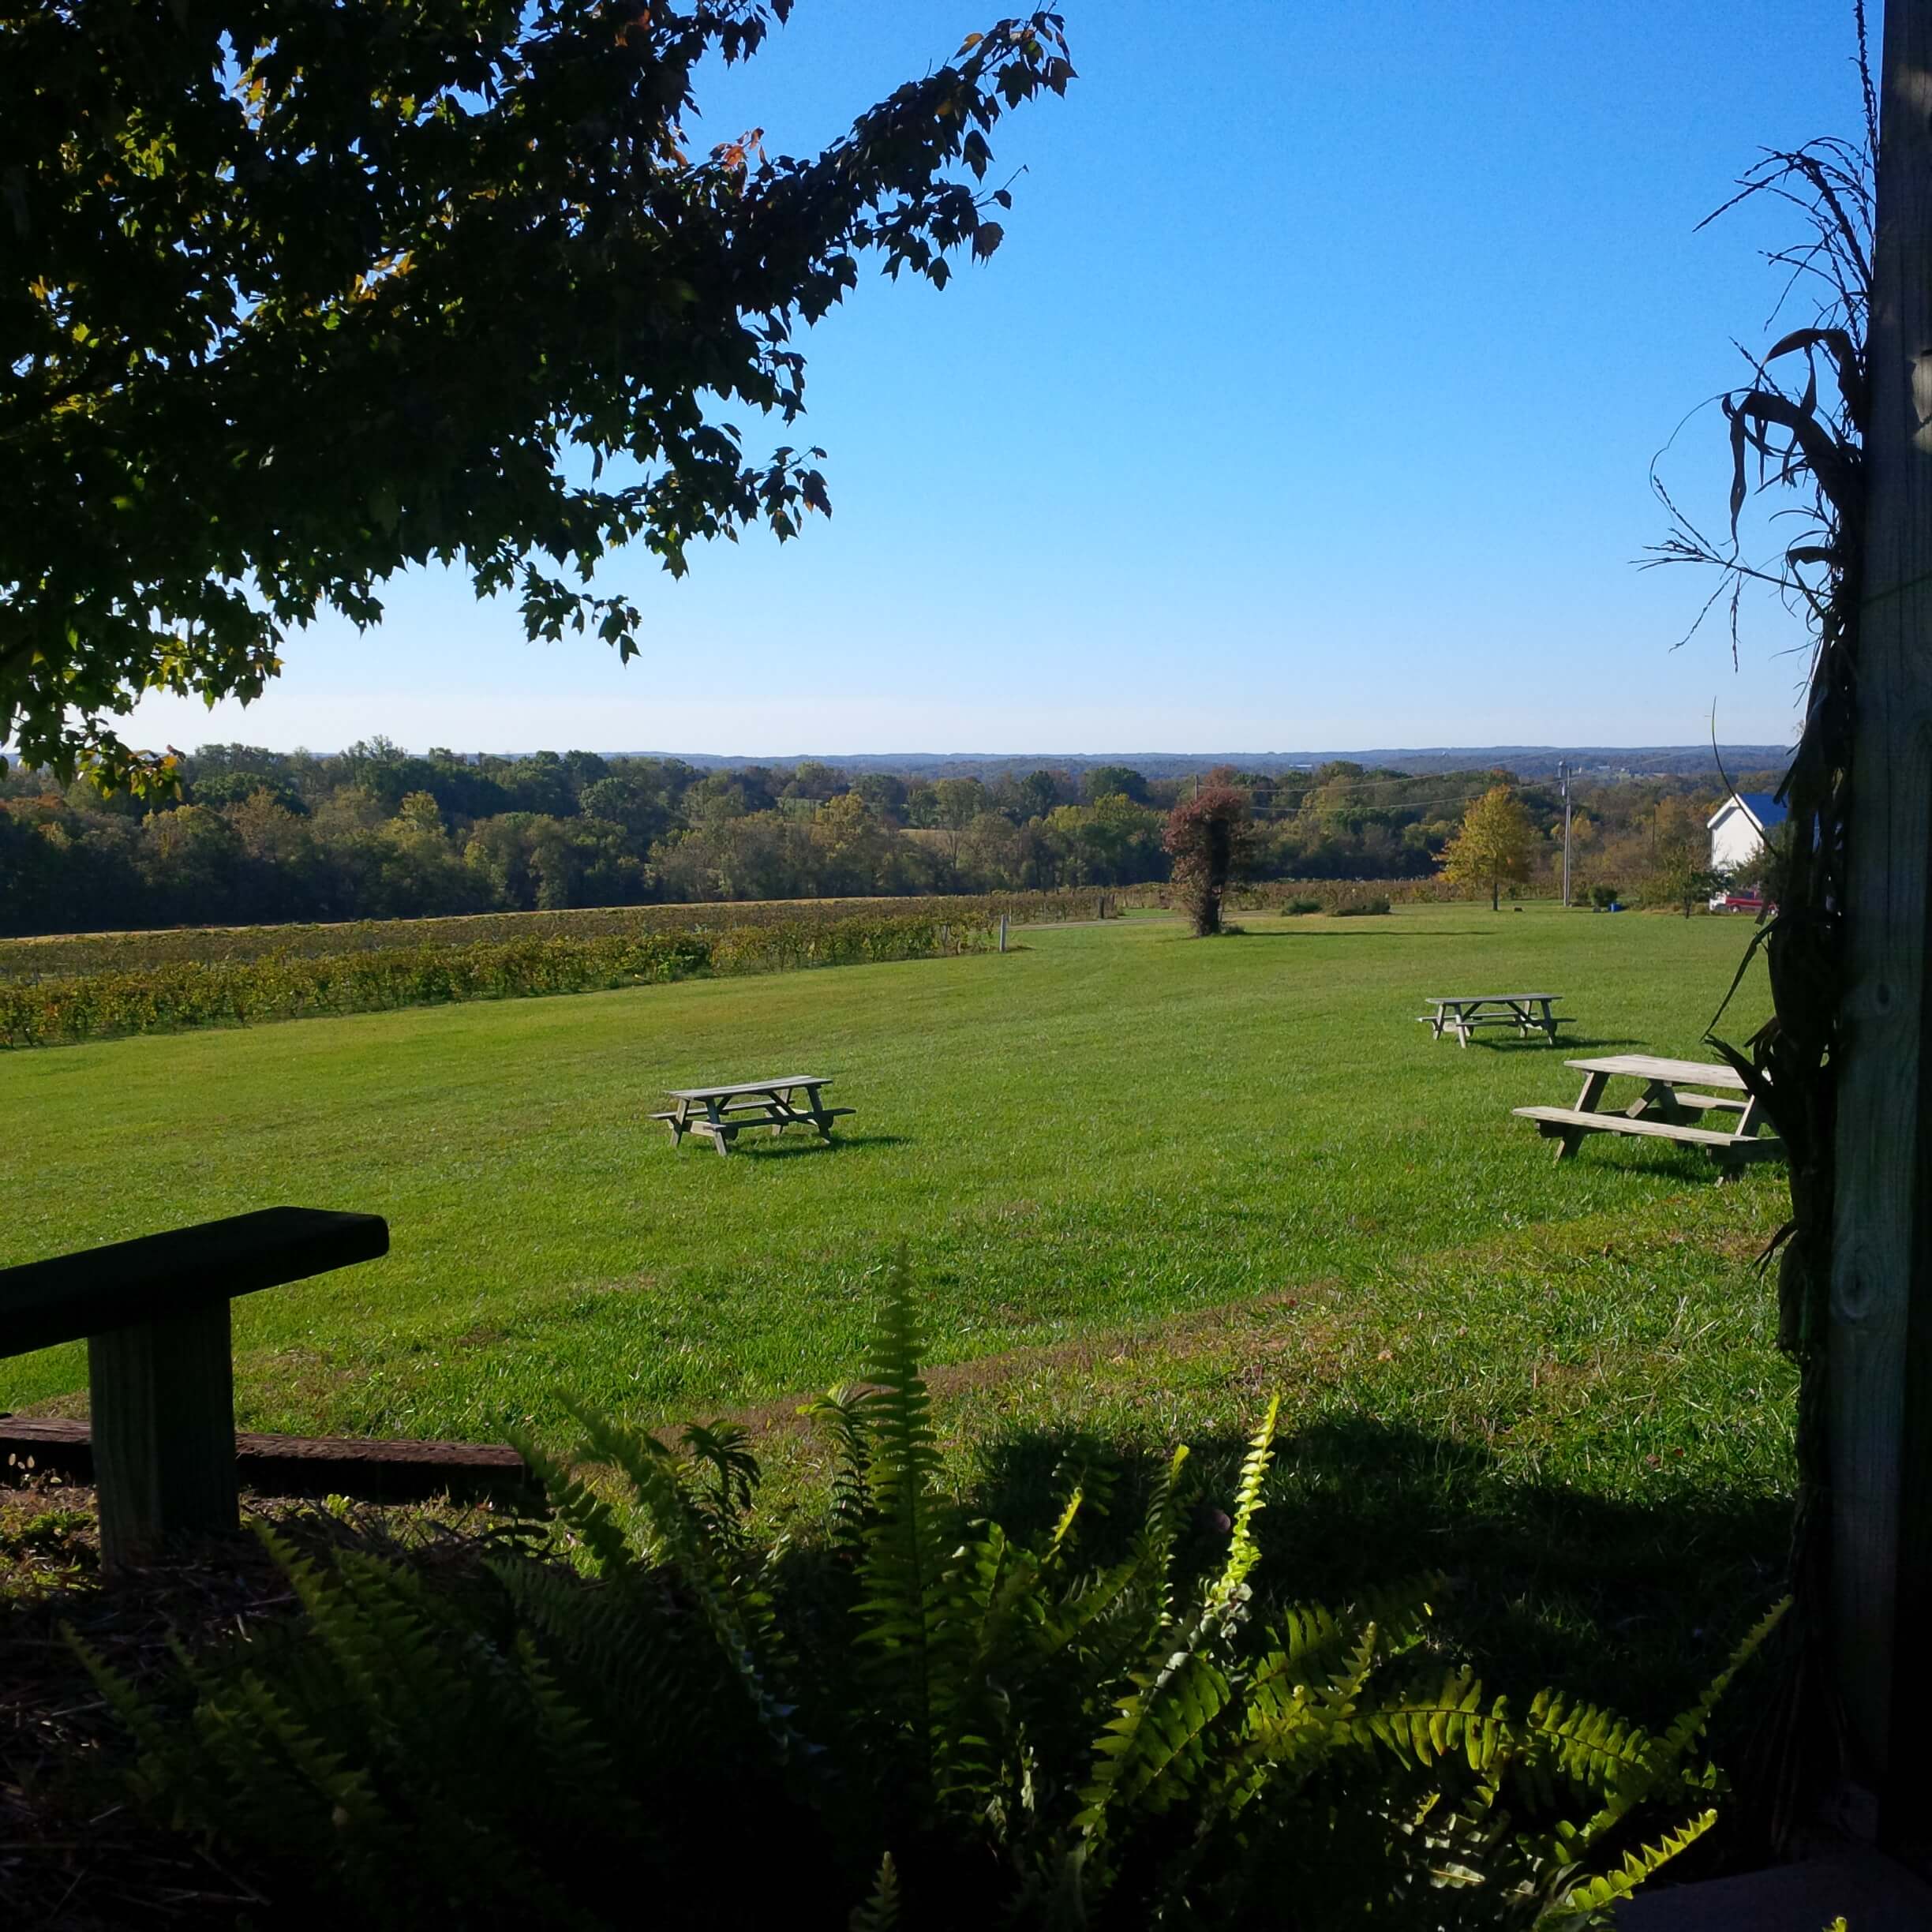 Röbller Vineyard and Winery- A green field with trees in the background. There are three picnic tables in the field.